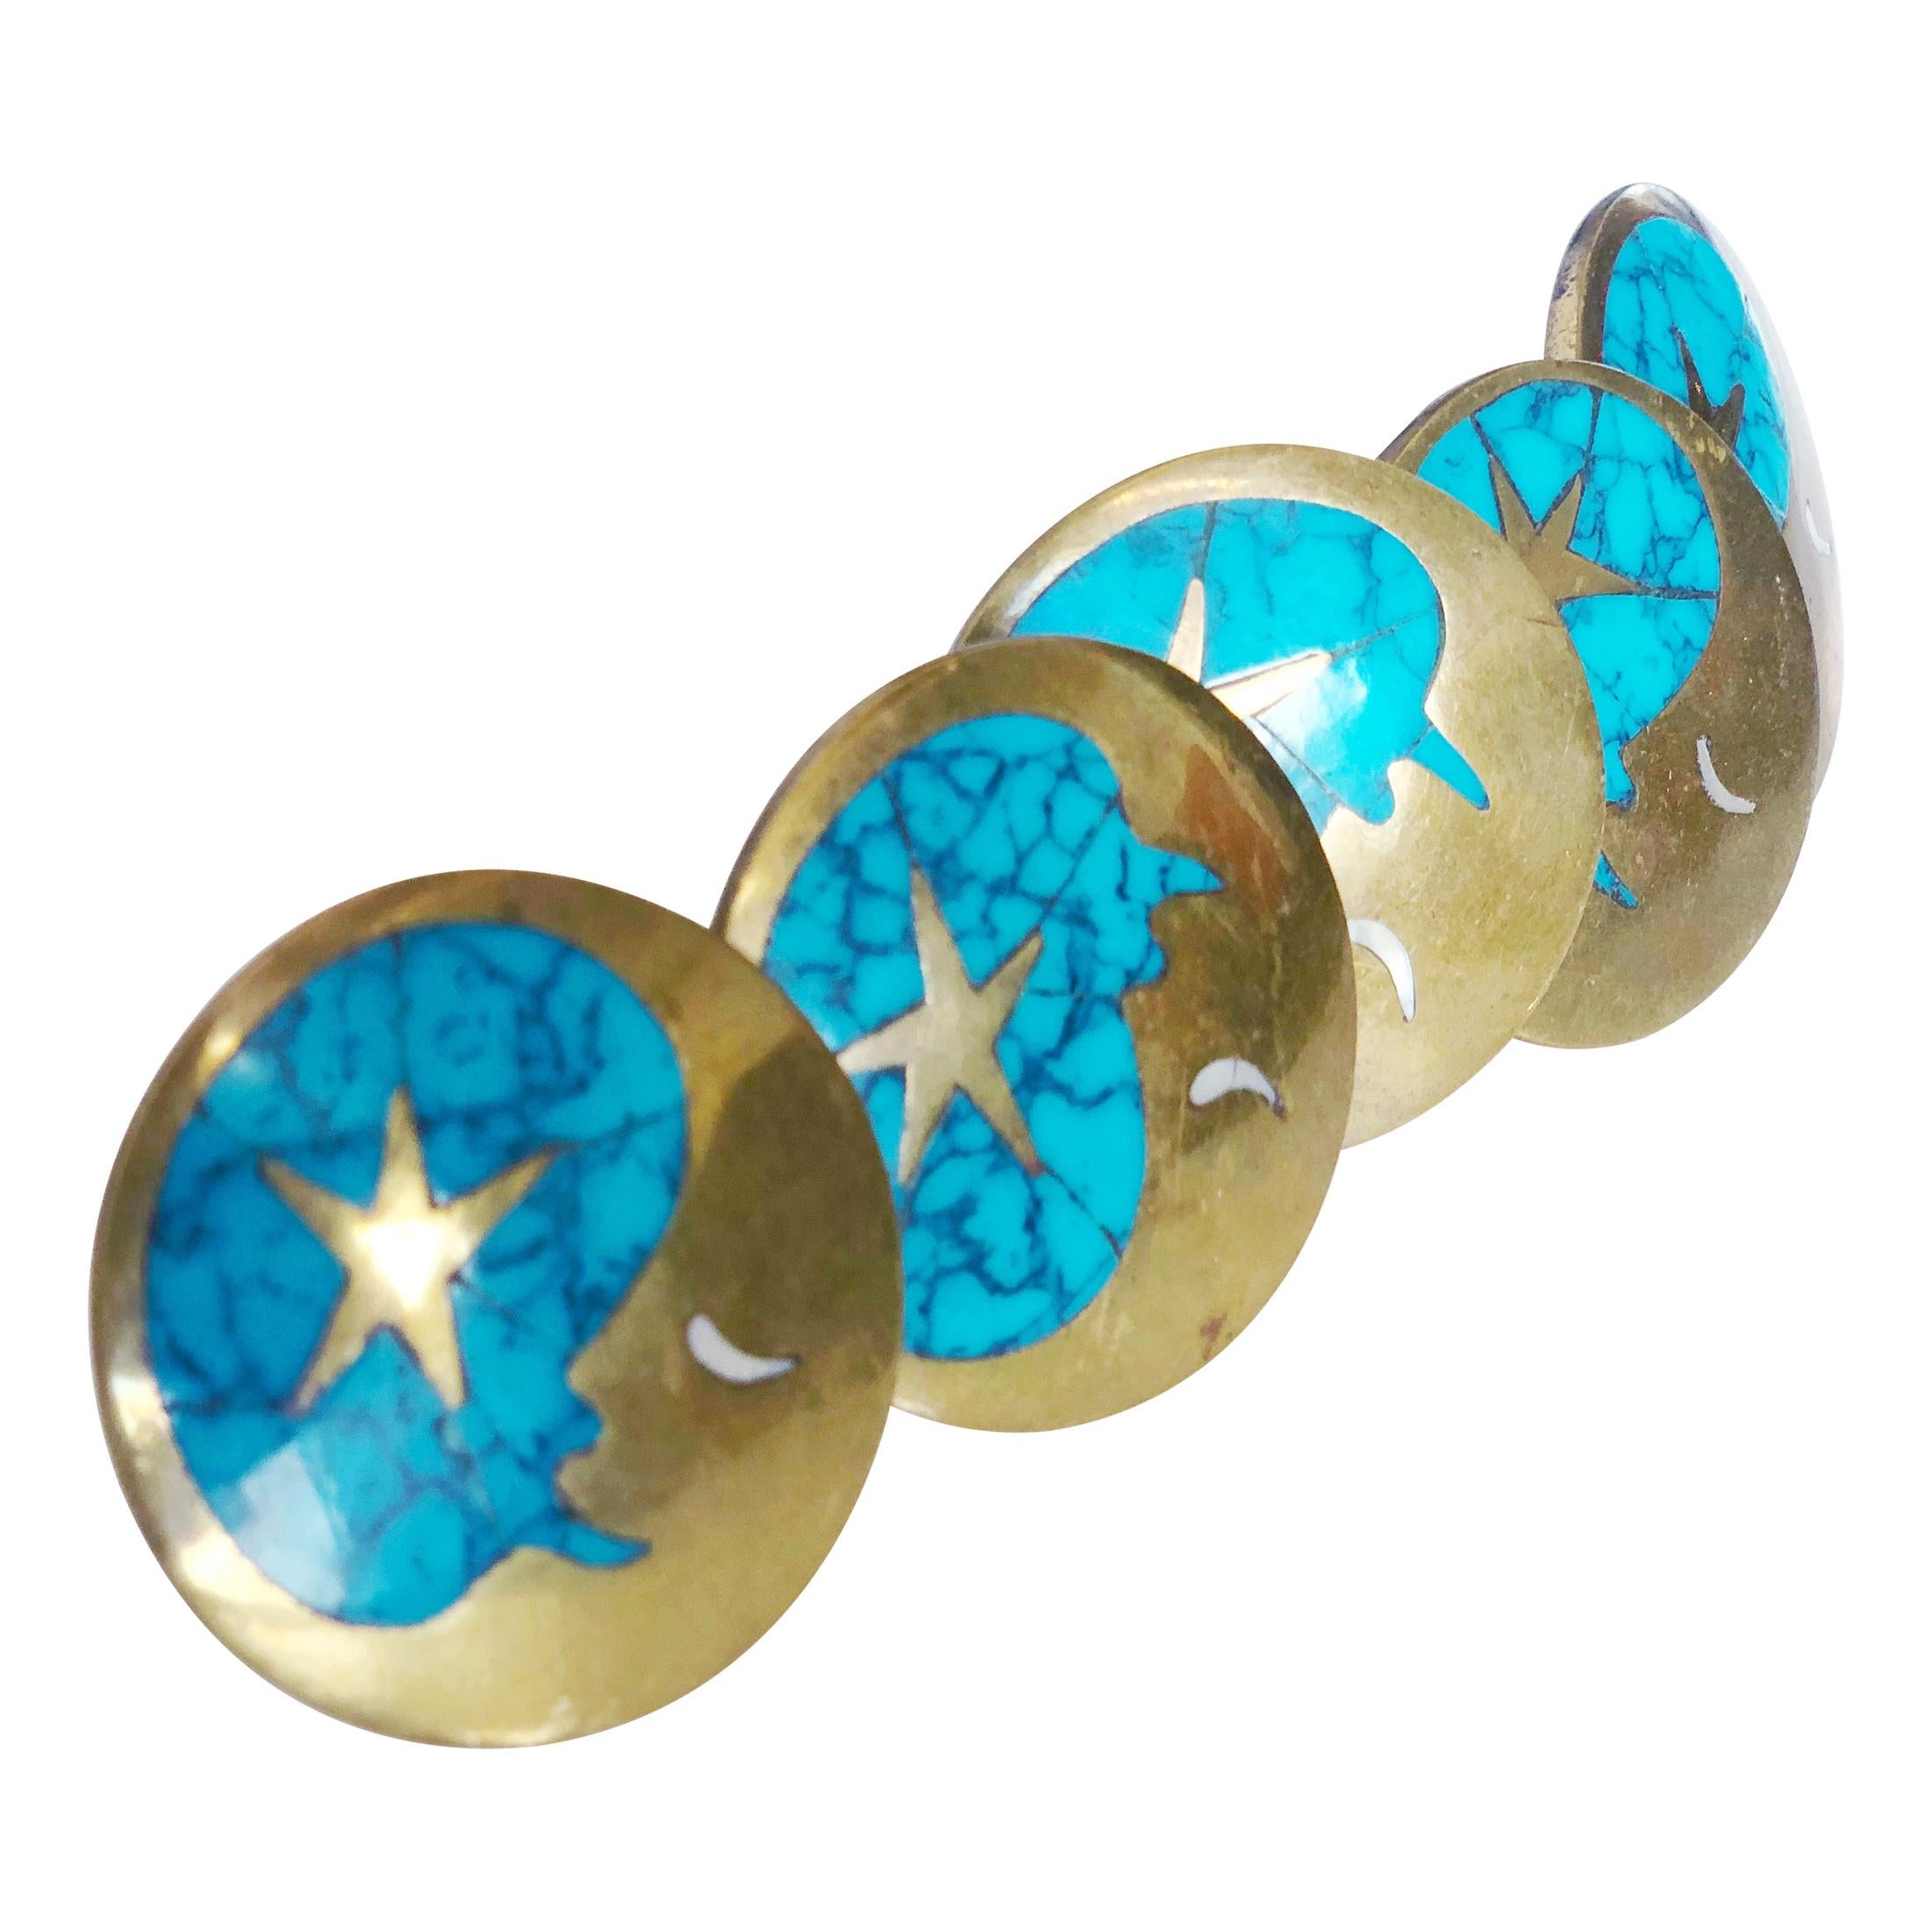 Vintage Blue Turquoise and Brass Drawer Pulls by Los Castillos, Mexico, c. 1960s